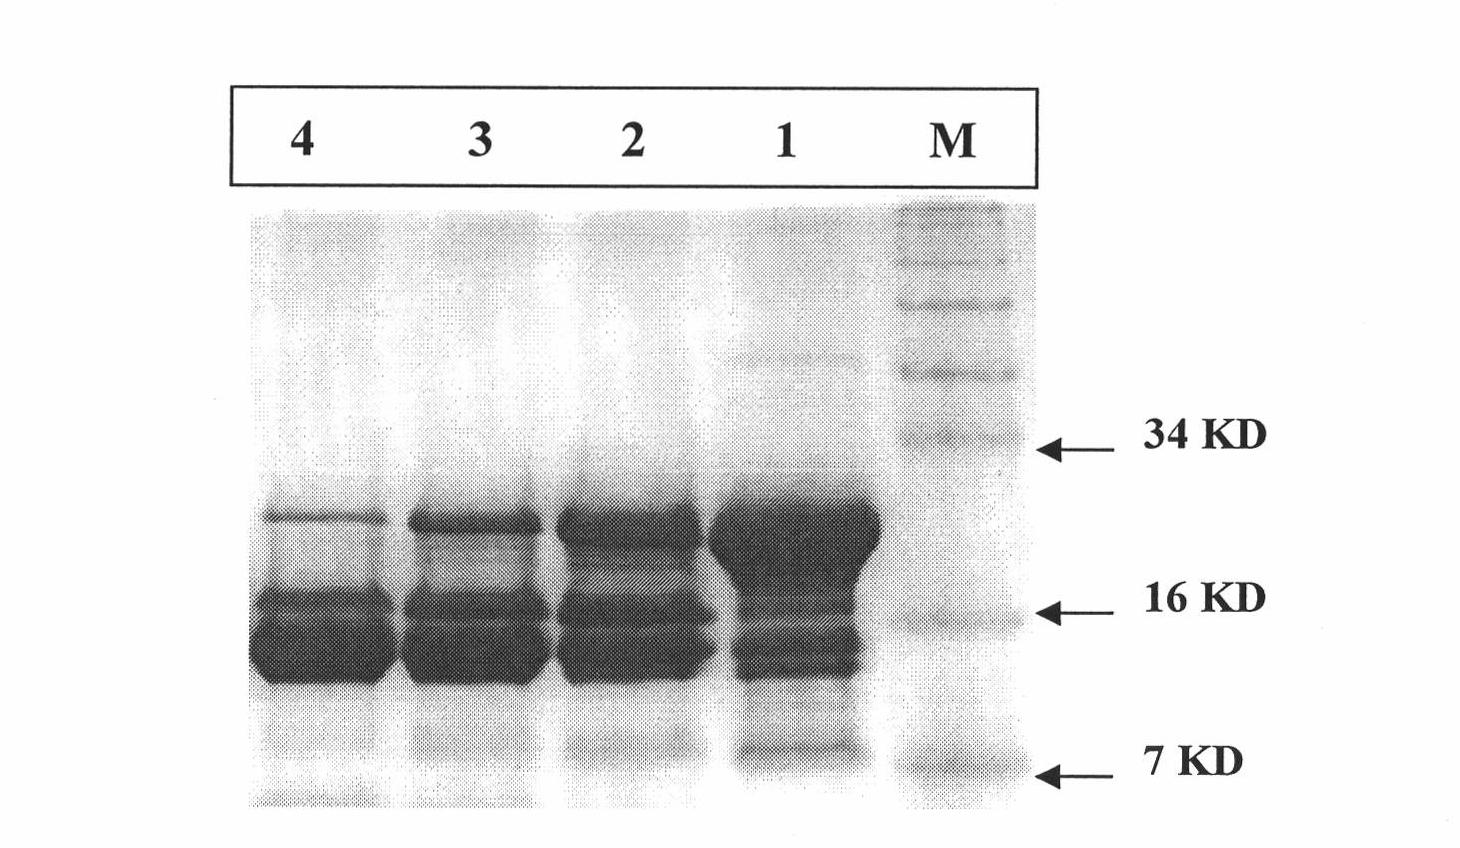 Synthetic method of enterokinase light chain gene and preparation method of expression product of enterokinase light chain gene